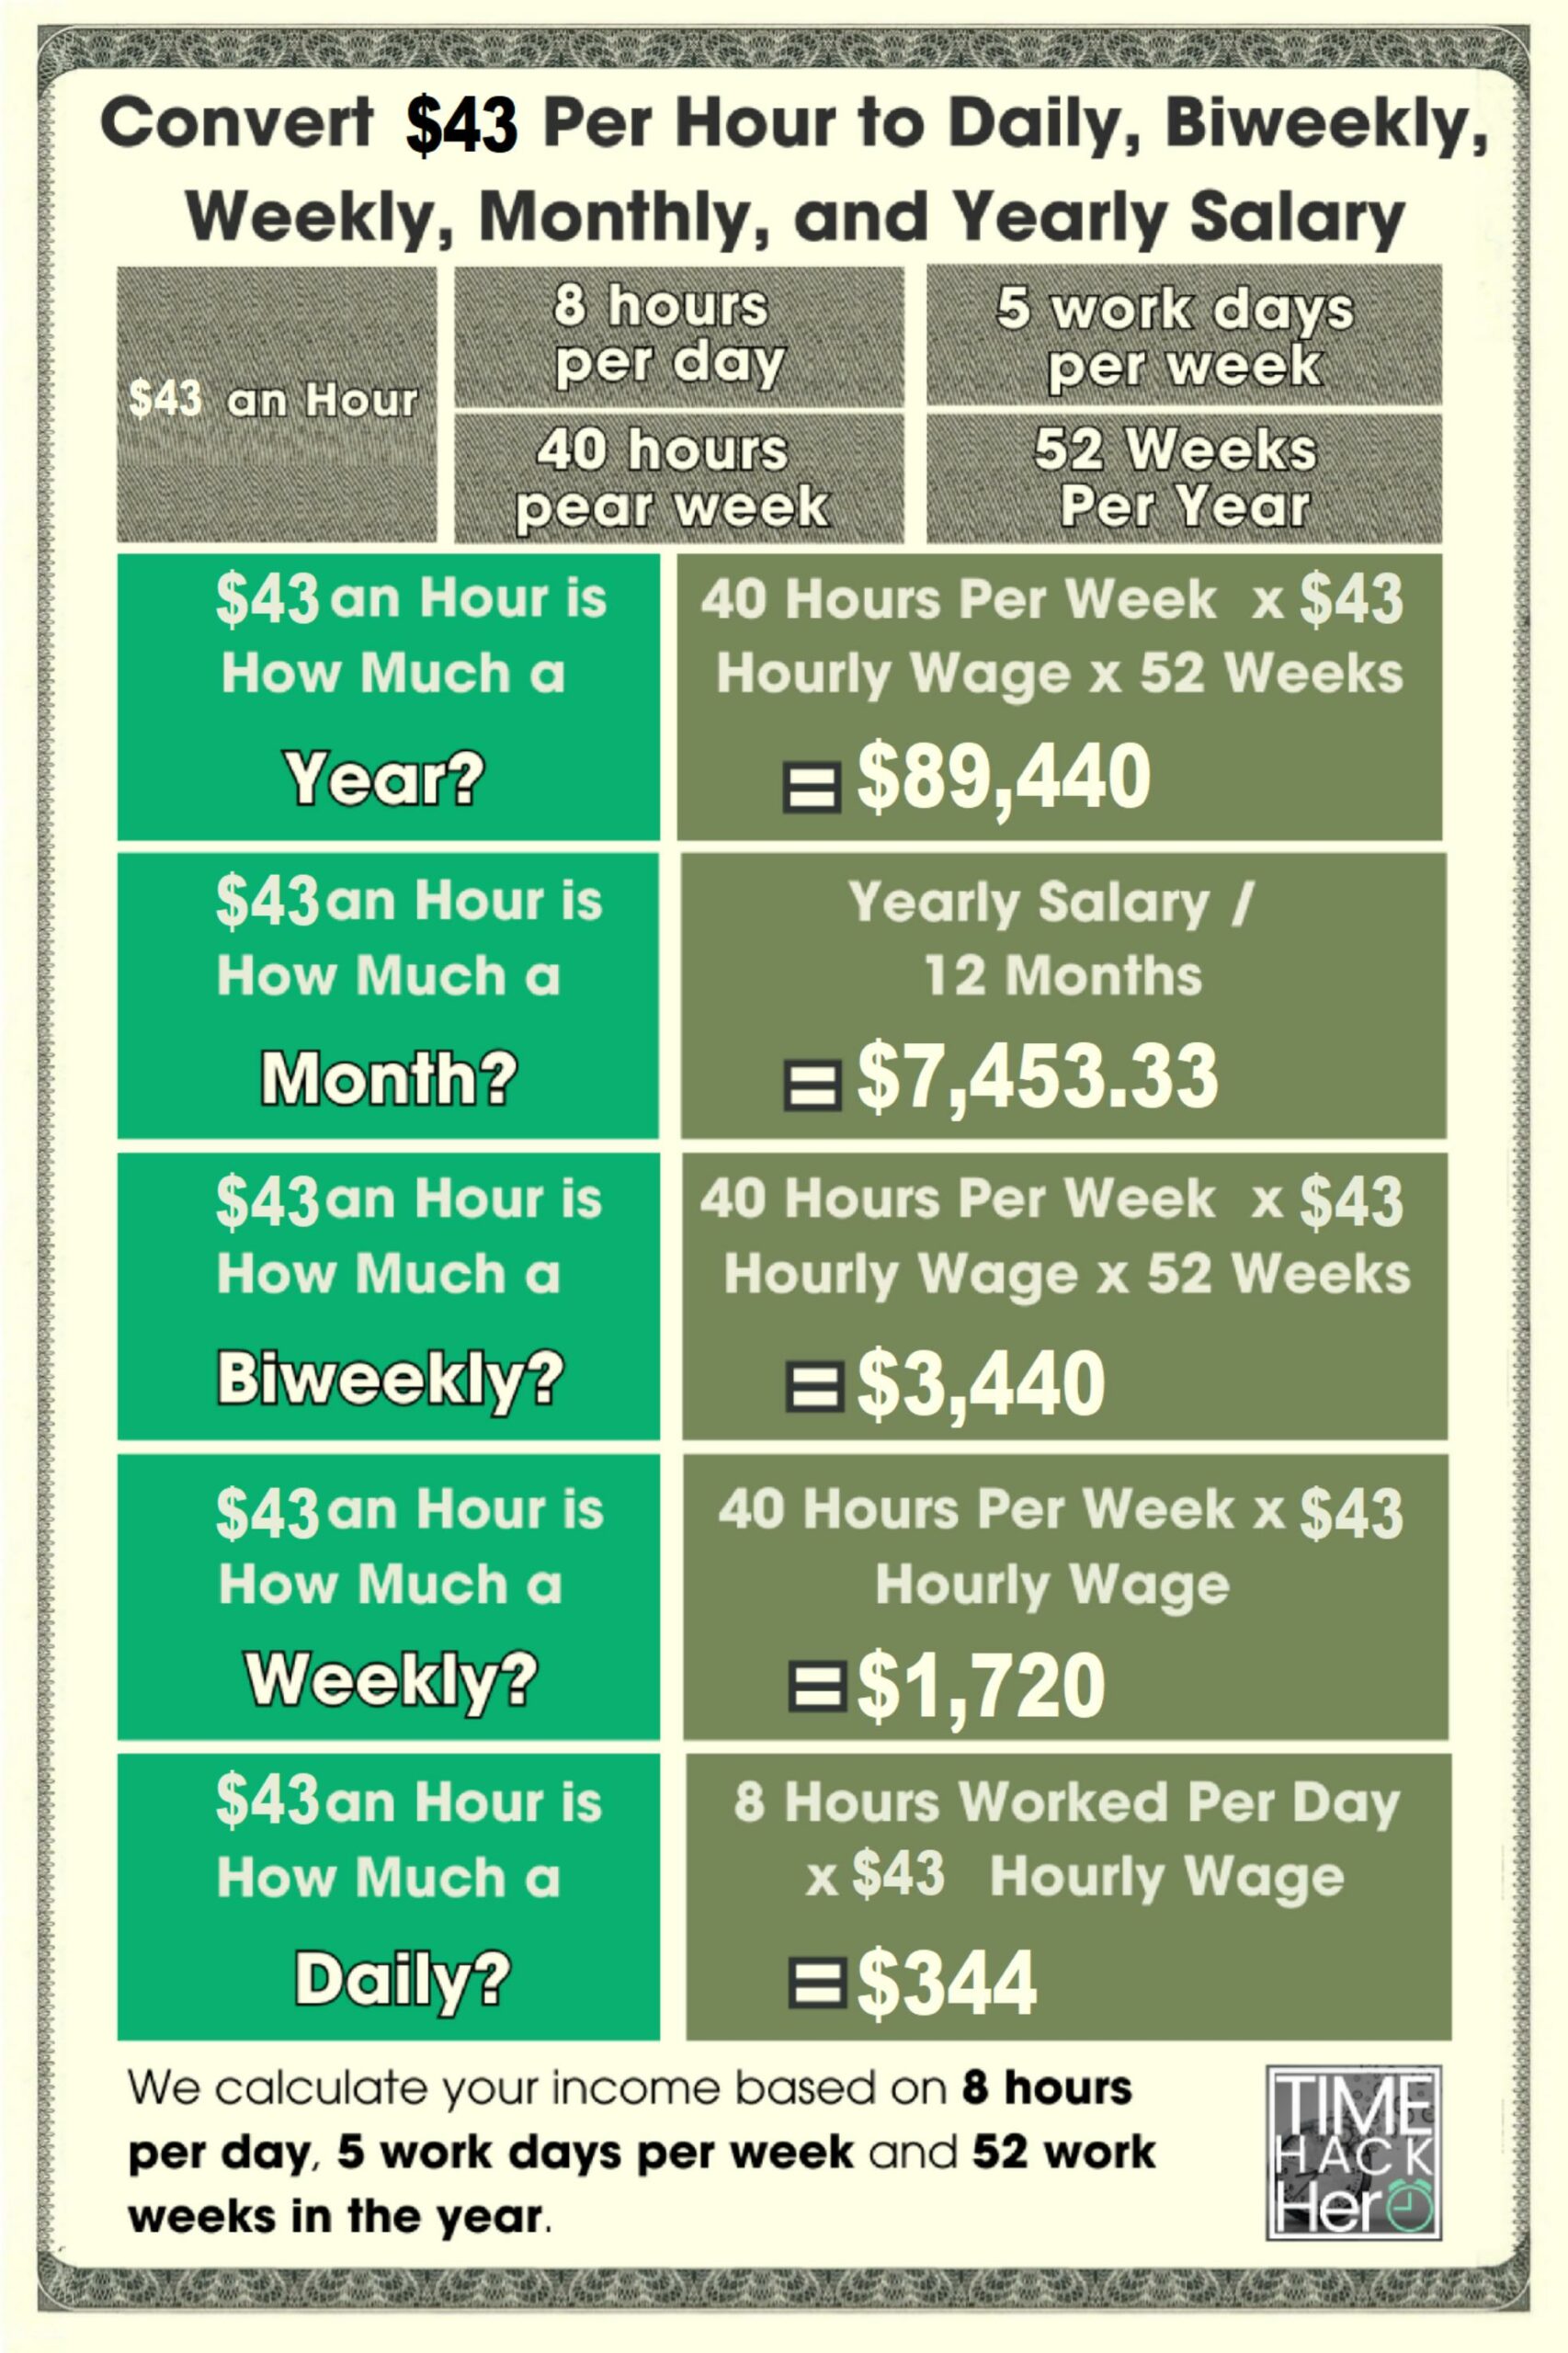 Convert $43 Per Hour to Daily, Biweekly, Weekly, Monthly, and Yearly Salary